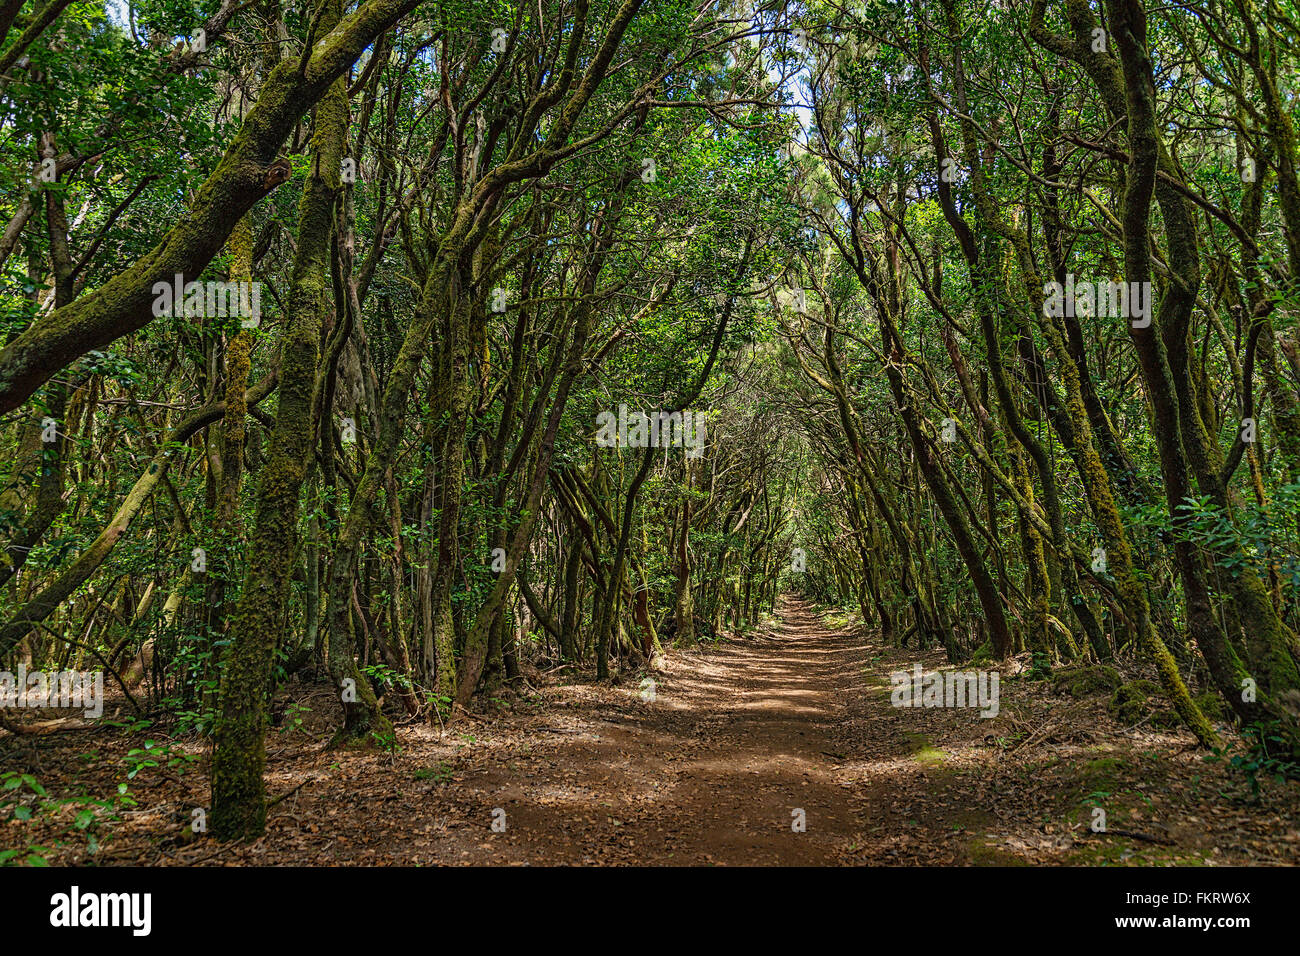 Garajonay National Park is covered by dense laurel forests. La Gomera, Canary Islands, Spain. Stock Photo